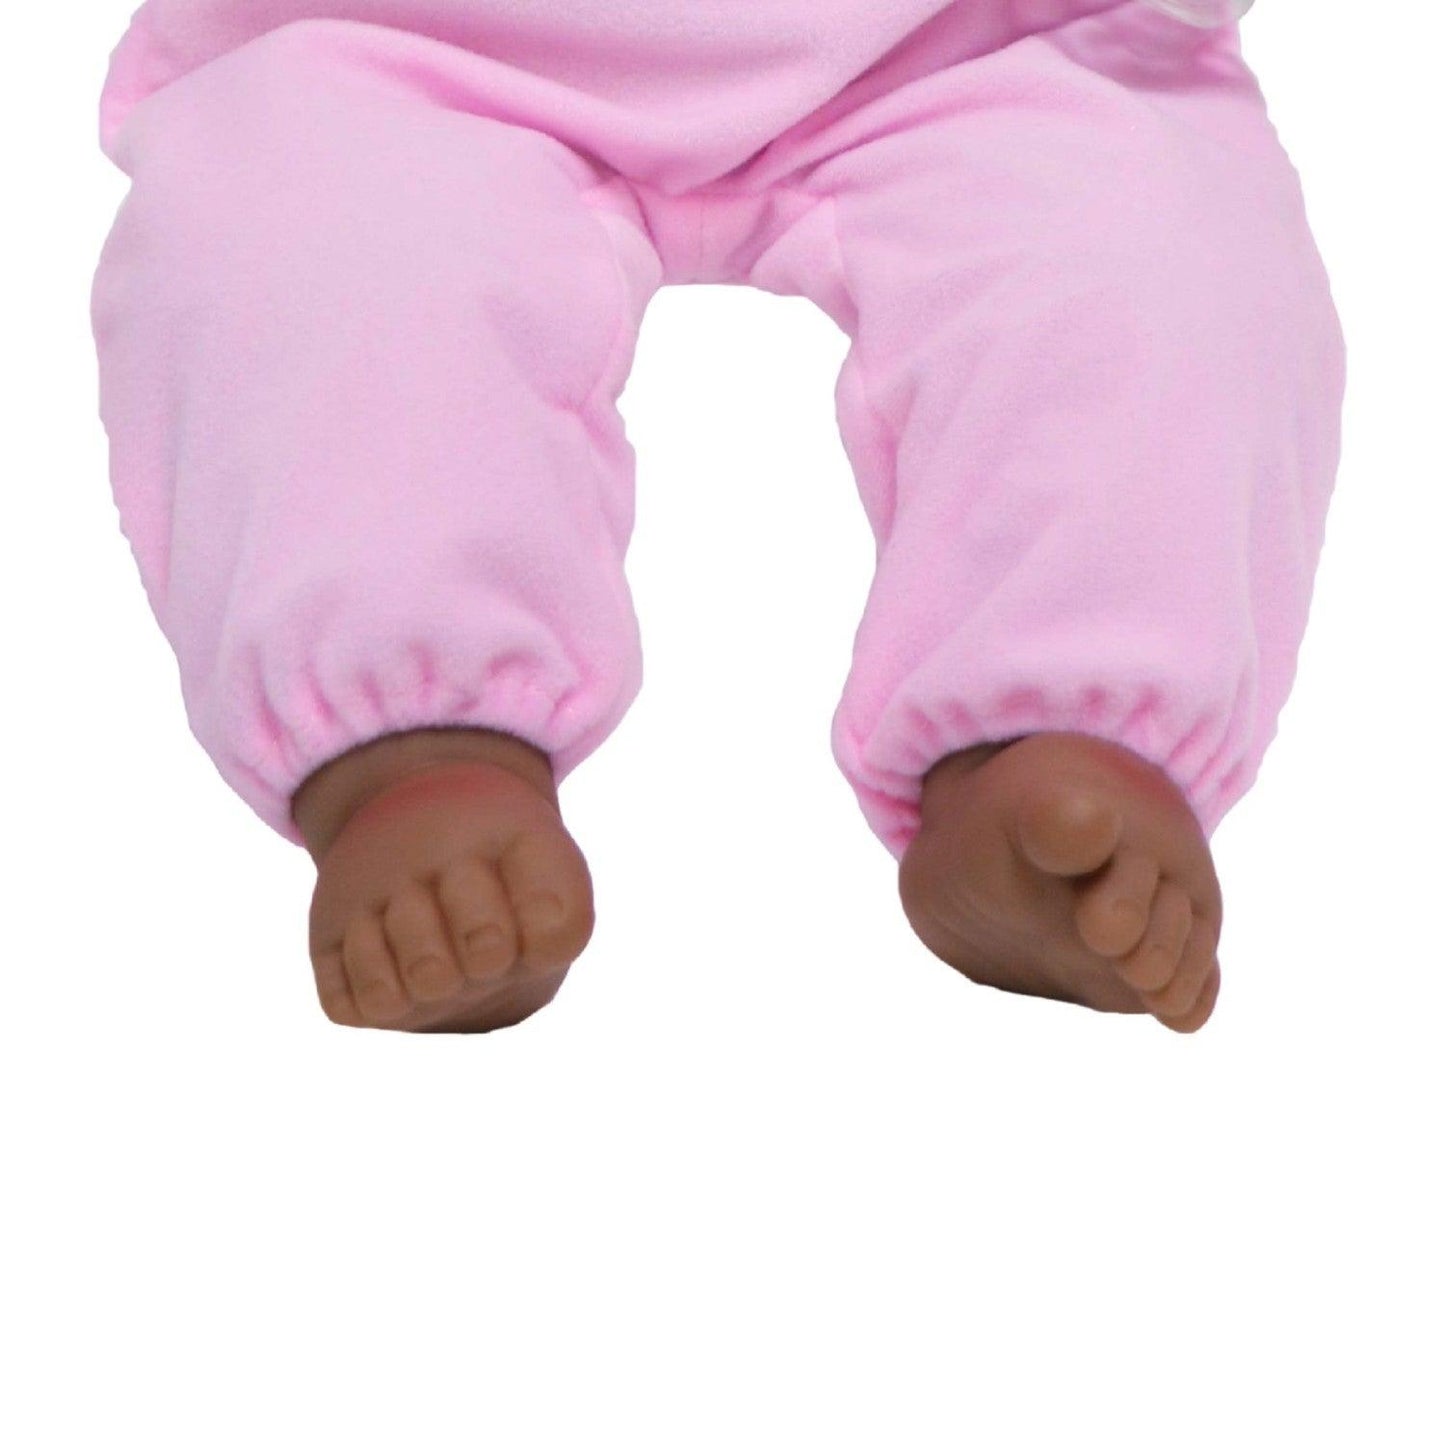 JC Toys, Lots to Cuddle Babies African American Soft Body Baby Doll 20 in - Pink - JC Toys Group Inc.